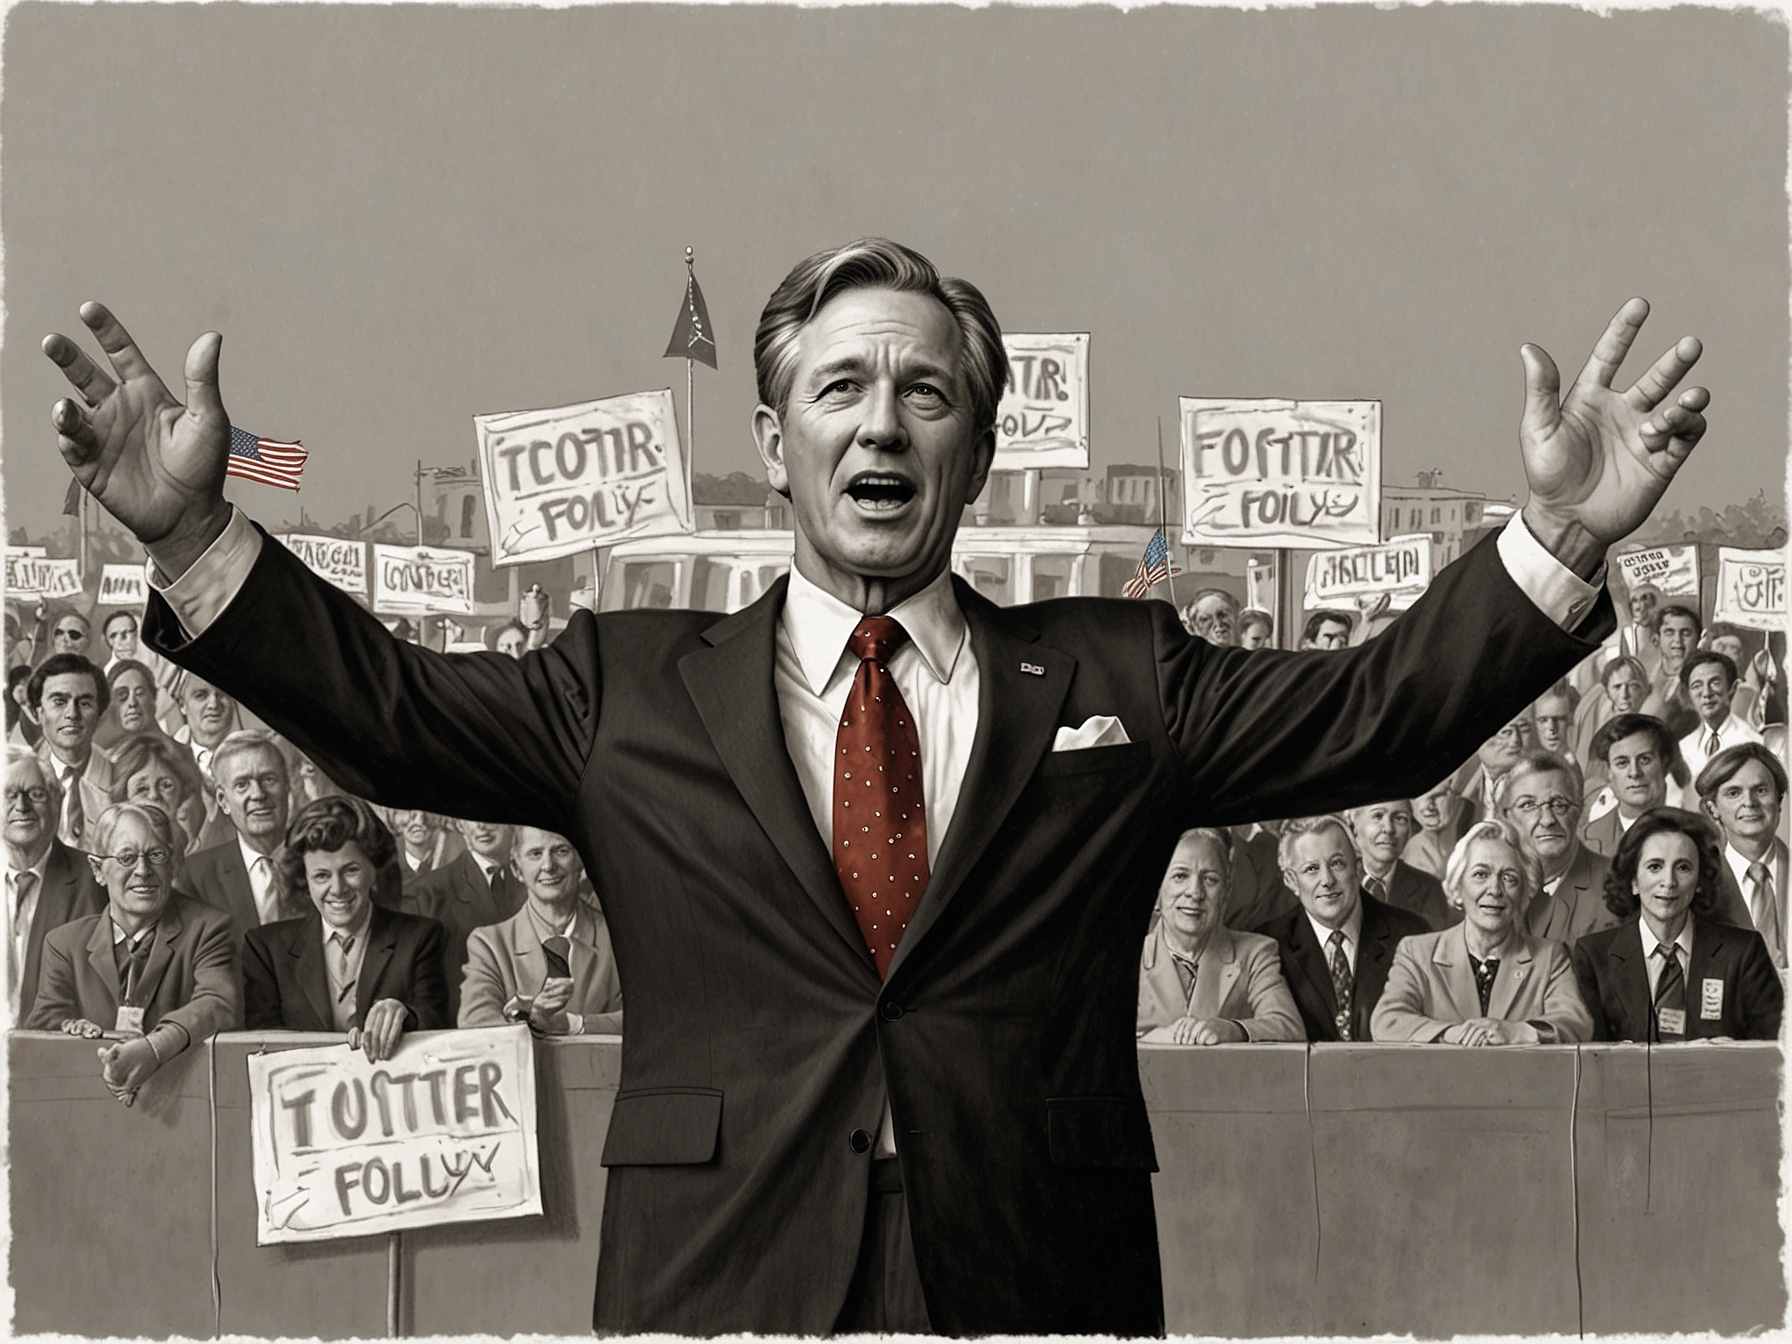 George Nethercutt during an election campaign, speaking to a crowd with banners for term limits, fiscal responsibility, and healthcare reform, symbolizing his 1994 victory over Tom Foley.